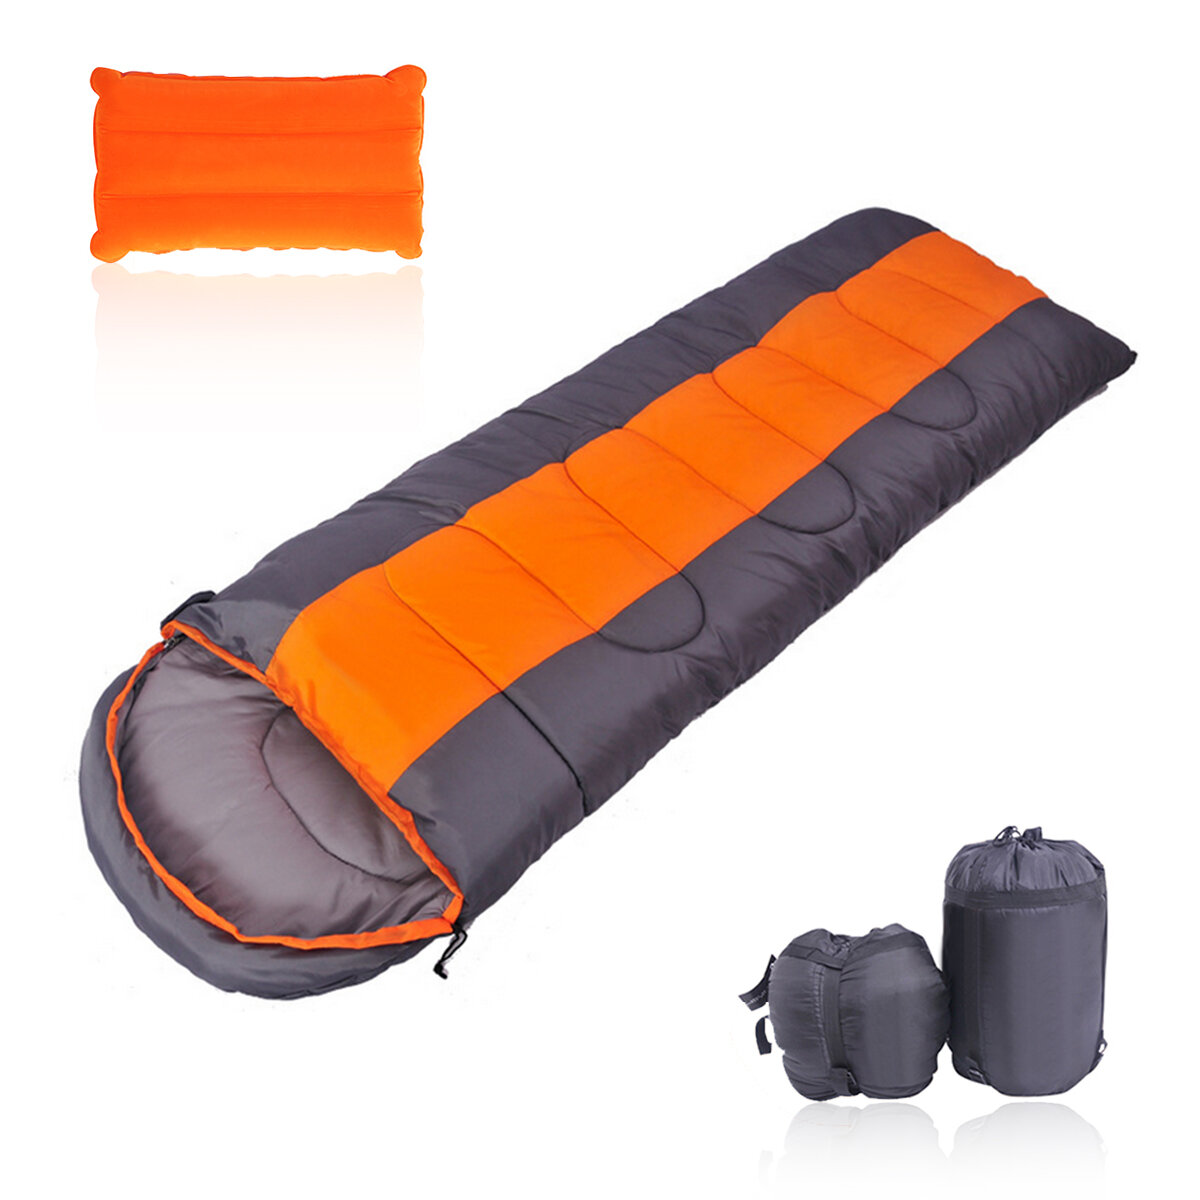 1.4KG Thicken 210T Waterproof Sleeping Bag With Pillow Portable Lightweight Outdoor Camping Hiking Sleeg Bag Outdoor Bed